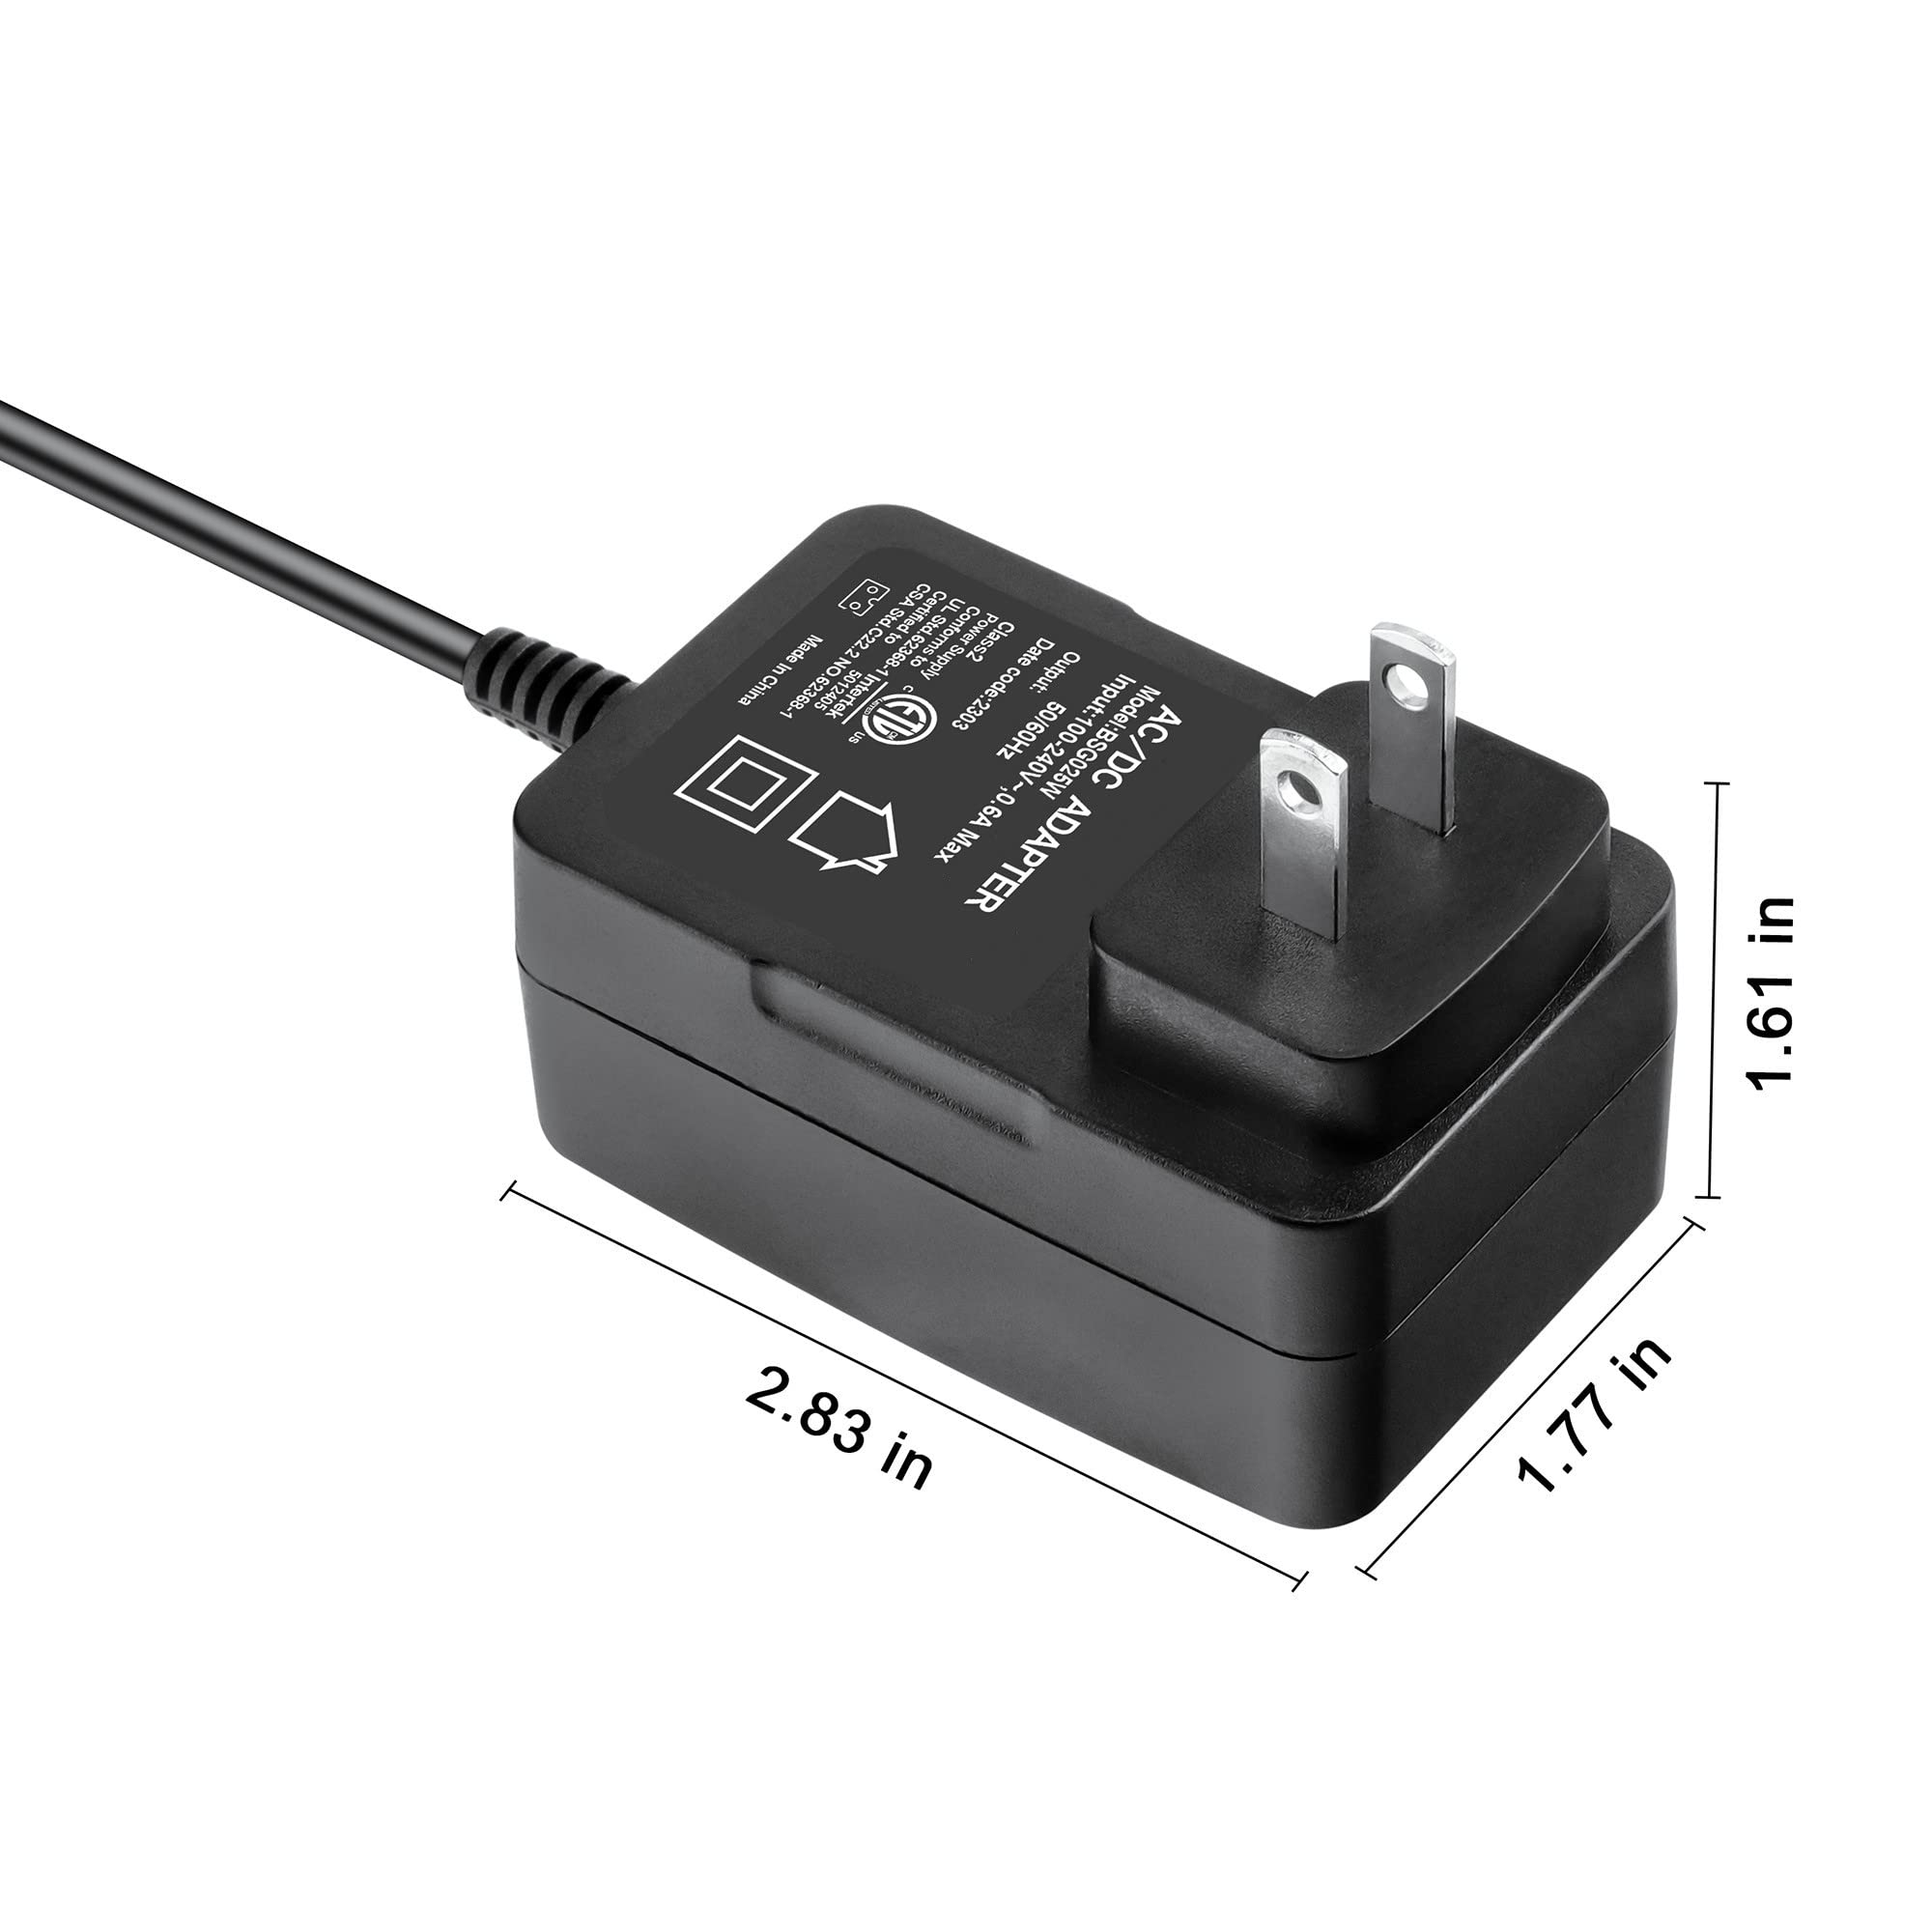 J-ZMQER 2-Prong 12.6V 1A AC/DC Adapter Compatible with AIPER Smart Seagull 600 HJ1102 Cordless Automatic Robotic Pool Vacuum Cleaner 2600mAh Lithium Ion Battery Sunshine XSD-1261000NUSD Power Charger